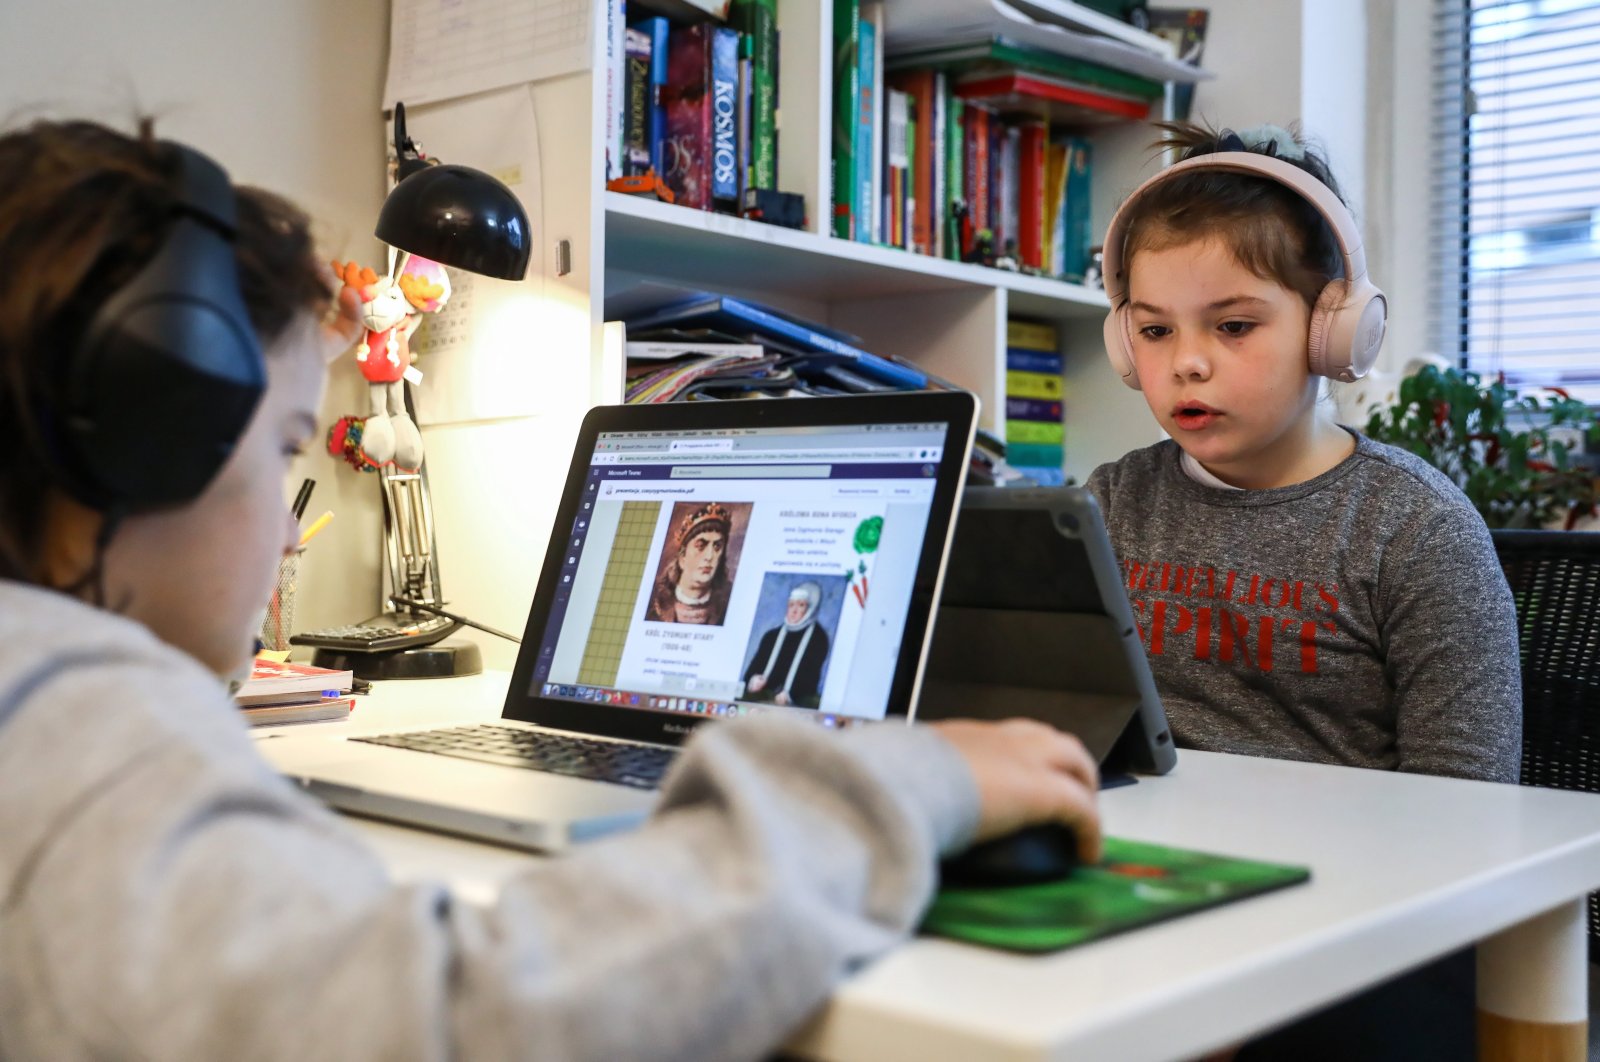 Children of a primary school study online from home in Warsaw, Poland, November 9, 2020, amid the ongoing COVID-19 pandemic. (EPA Photo)